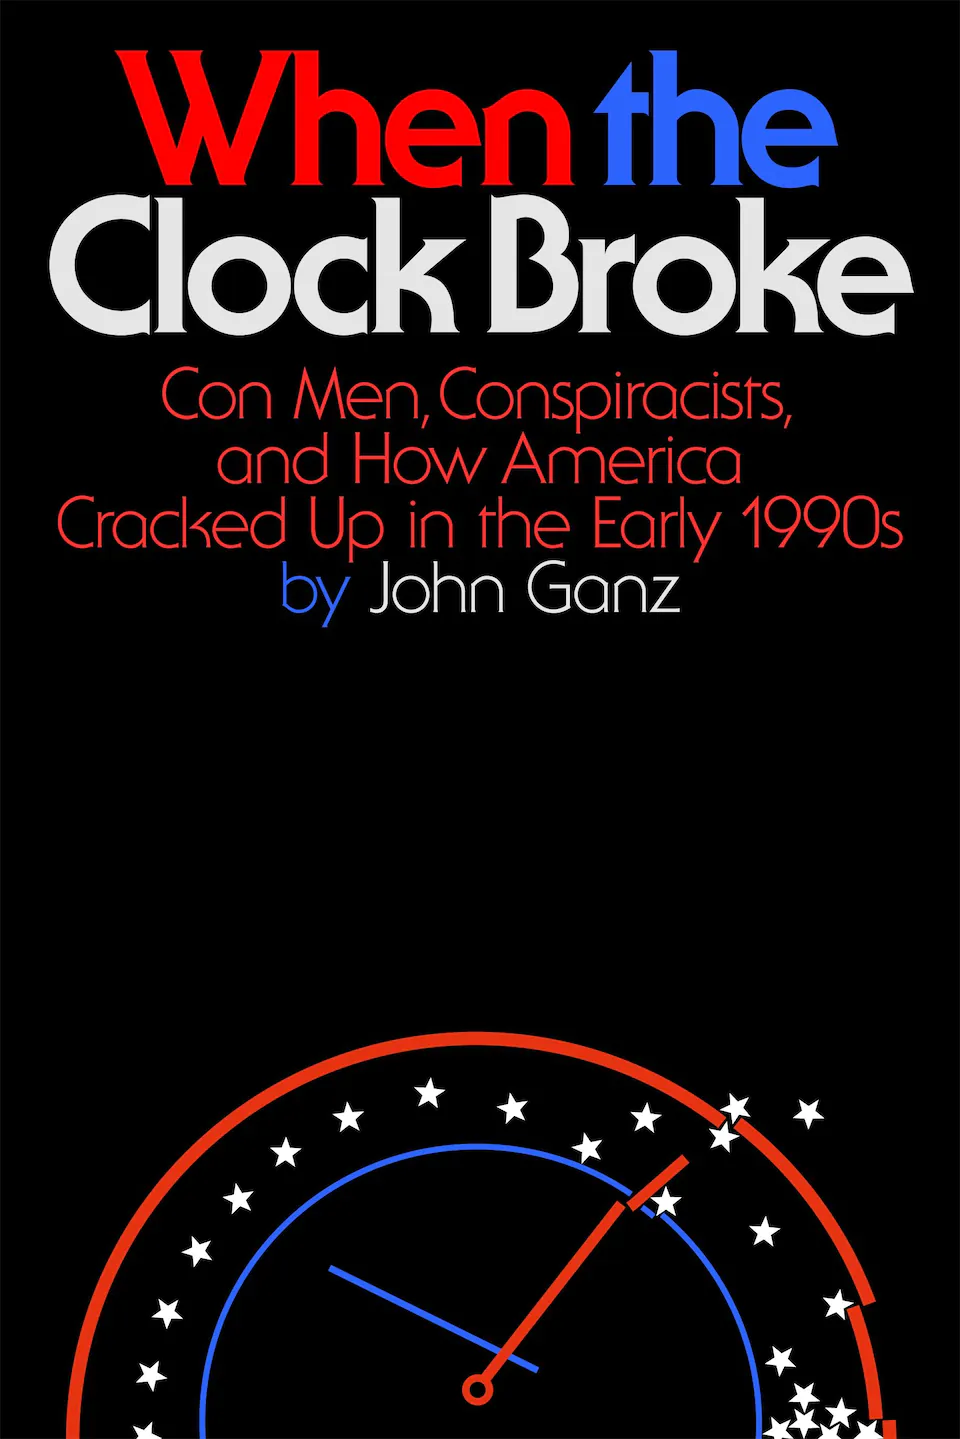 When the Clock Broke: Con Men, Conspiracists, and How America Cracked Up in the Early 1990s by John Ganz finished on 2024 Jul 07